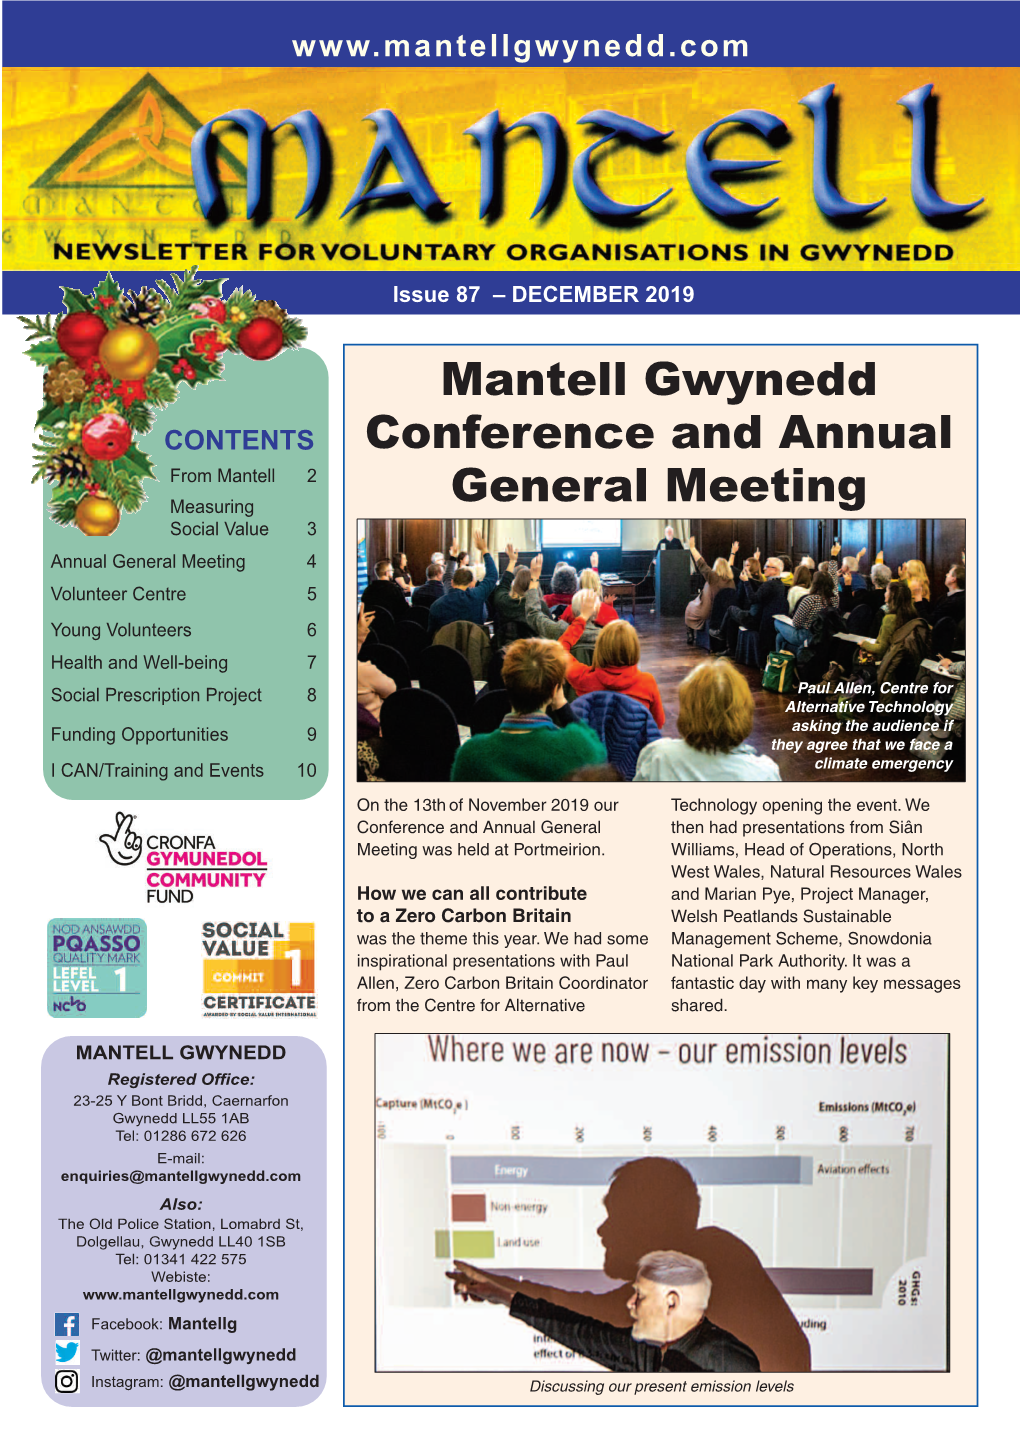 Mantell Gwynedd Conference and Annual General Meeting